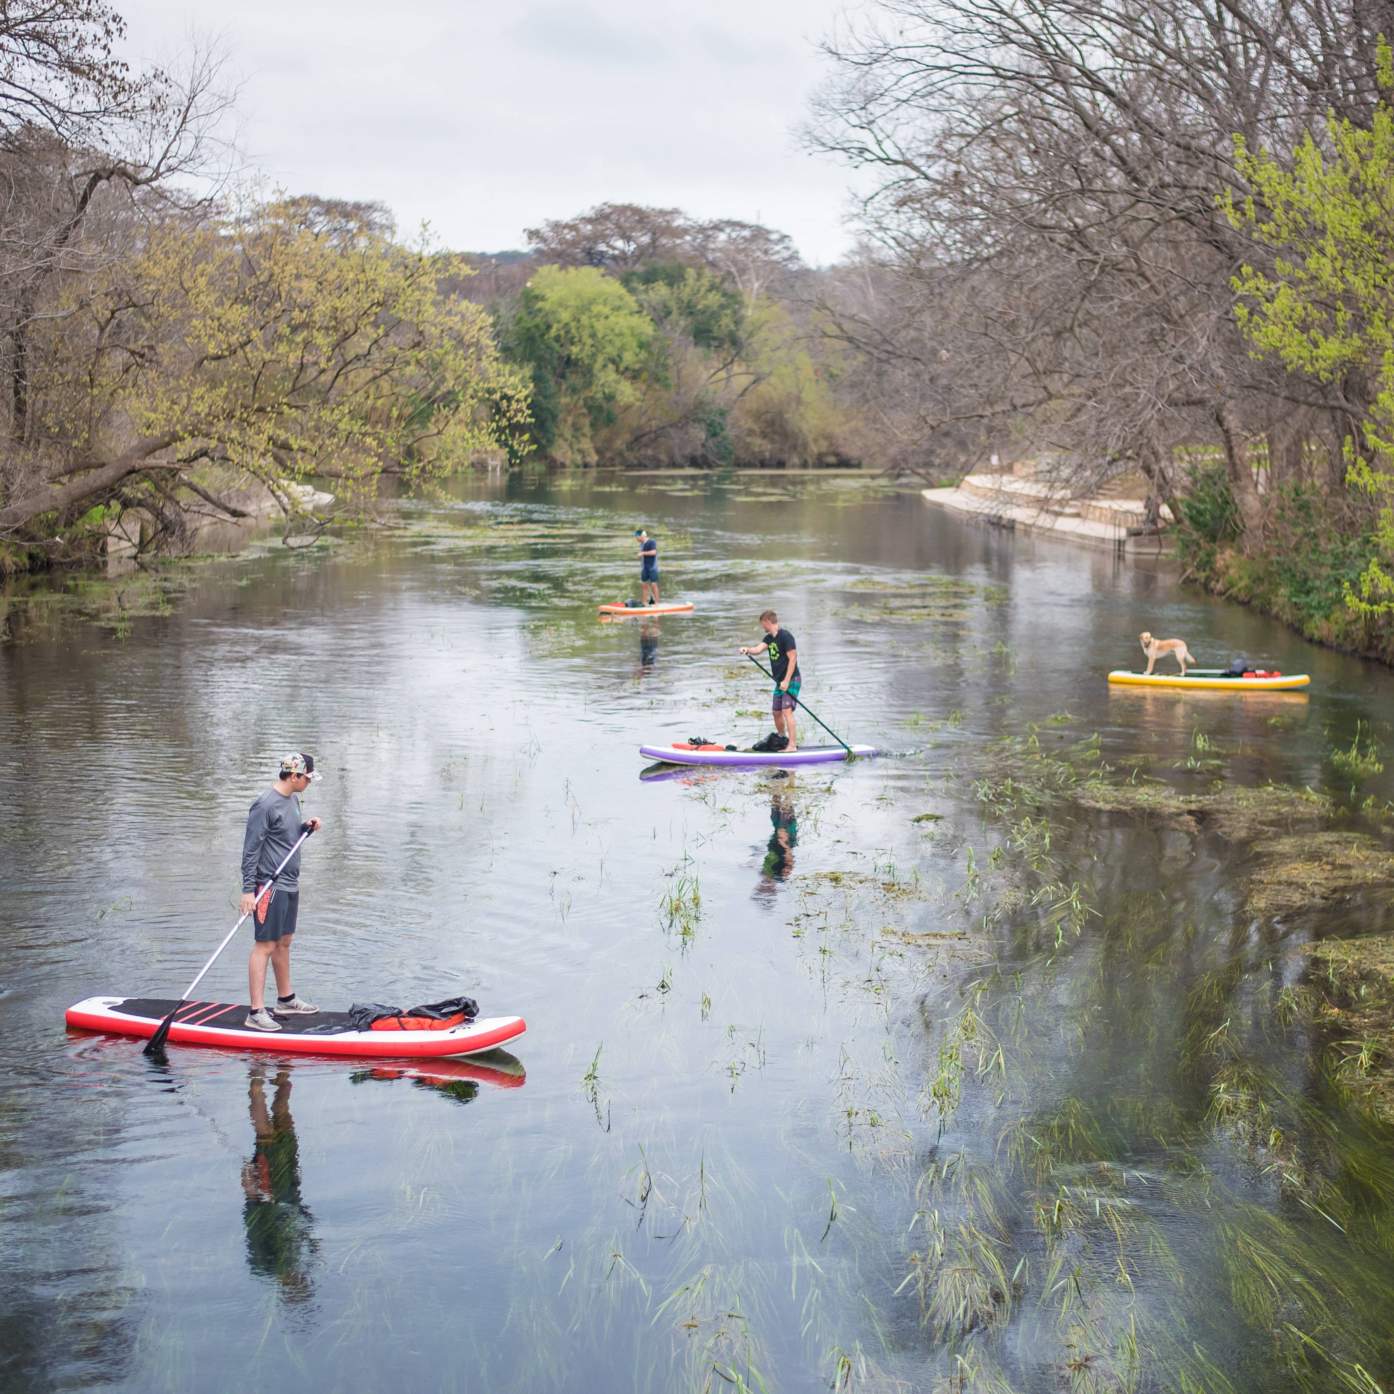 multiple standing paddle boards make their way up and down the river to collect trash